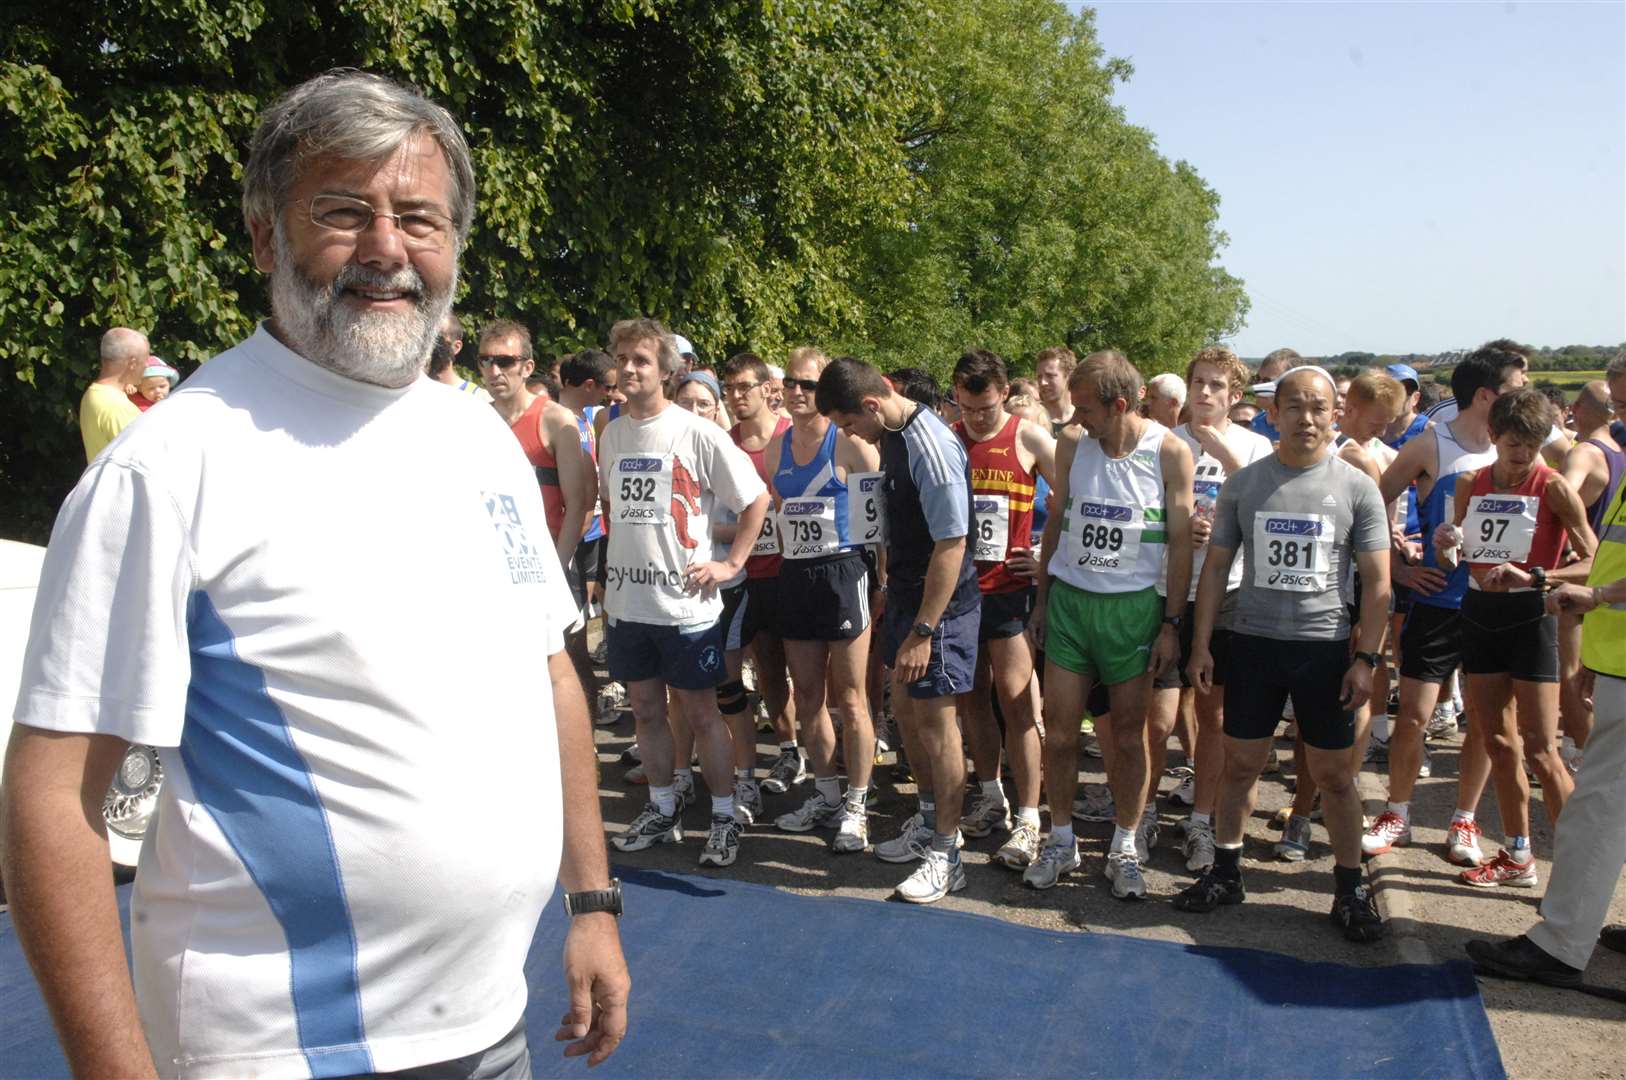 Mike Gratton at the start of the Canterbury Half Marathon in aid of the Pilgrims Hospice